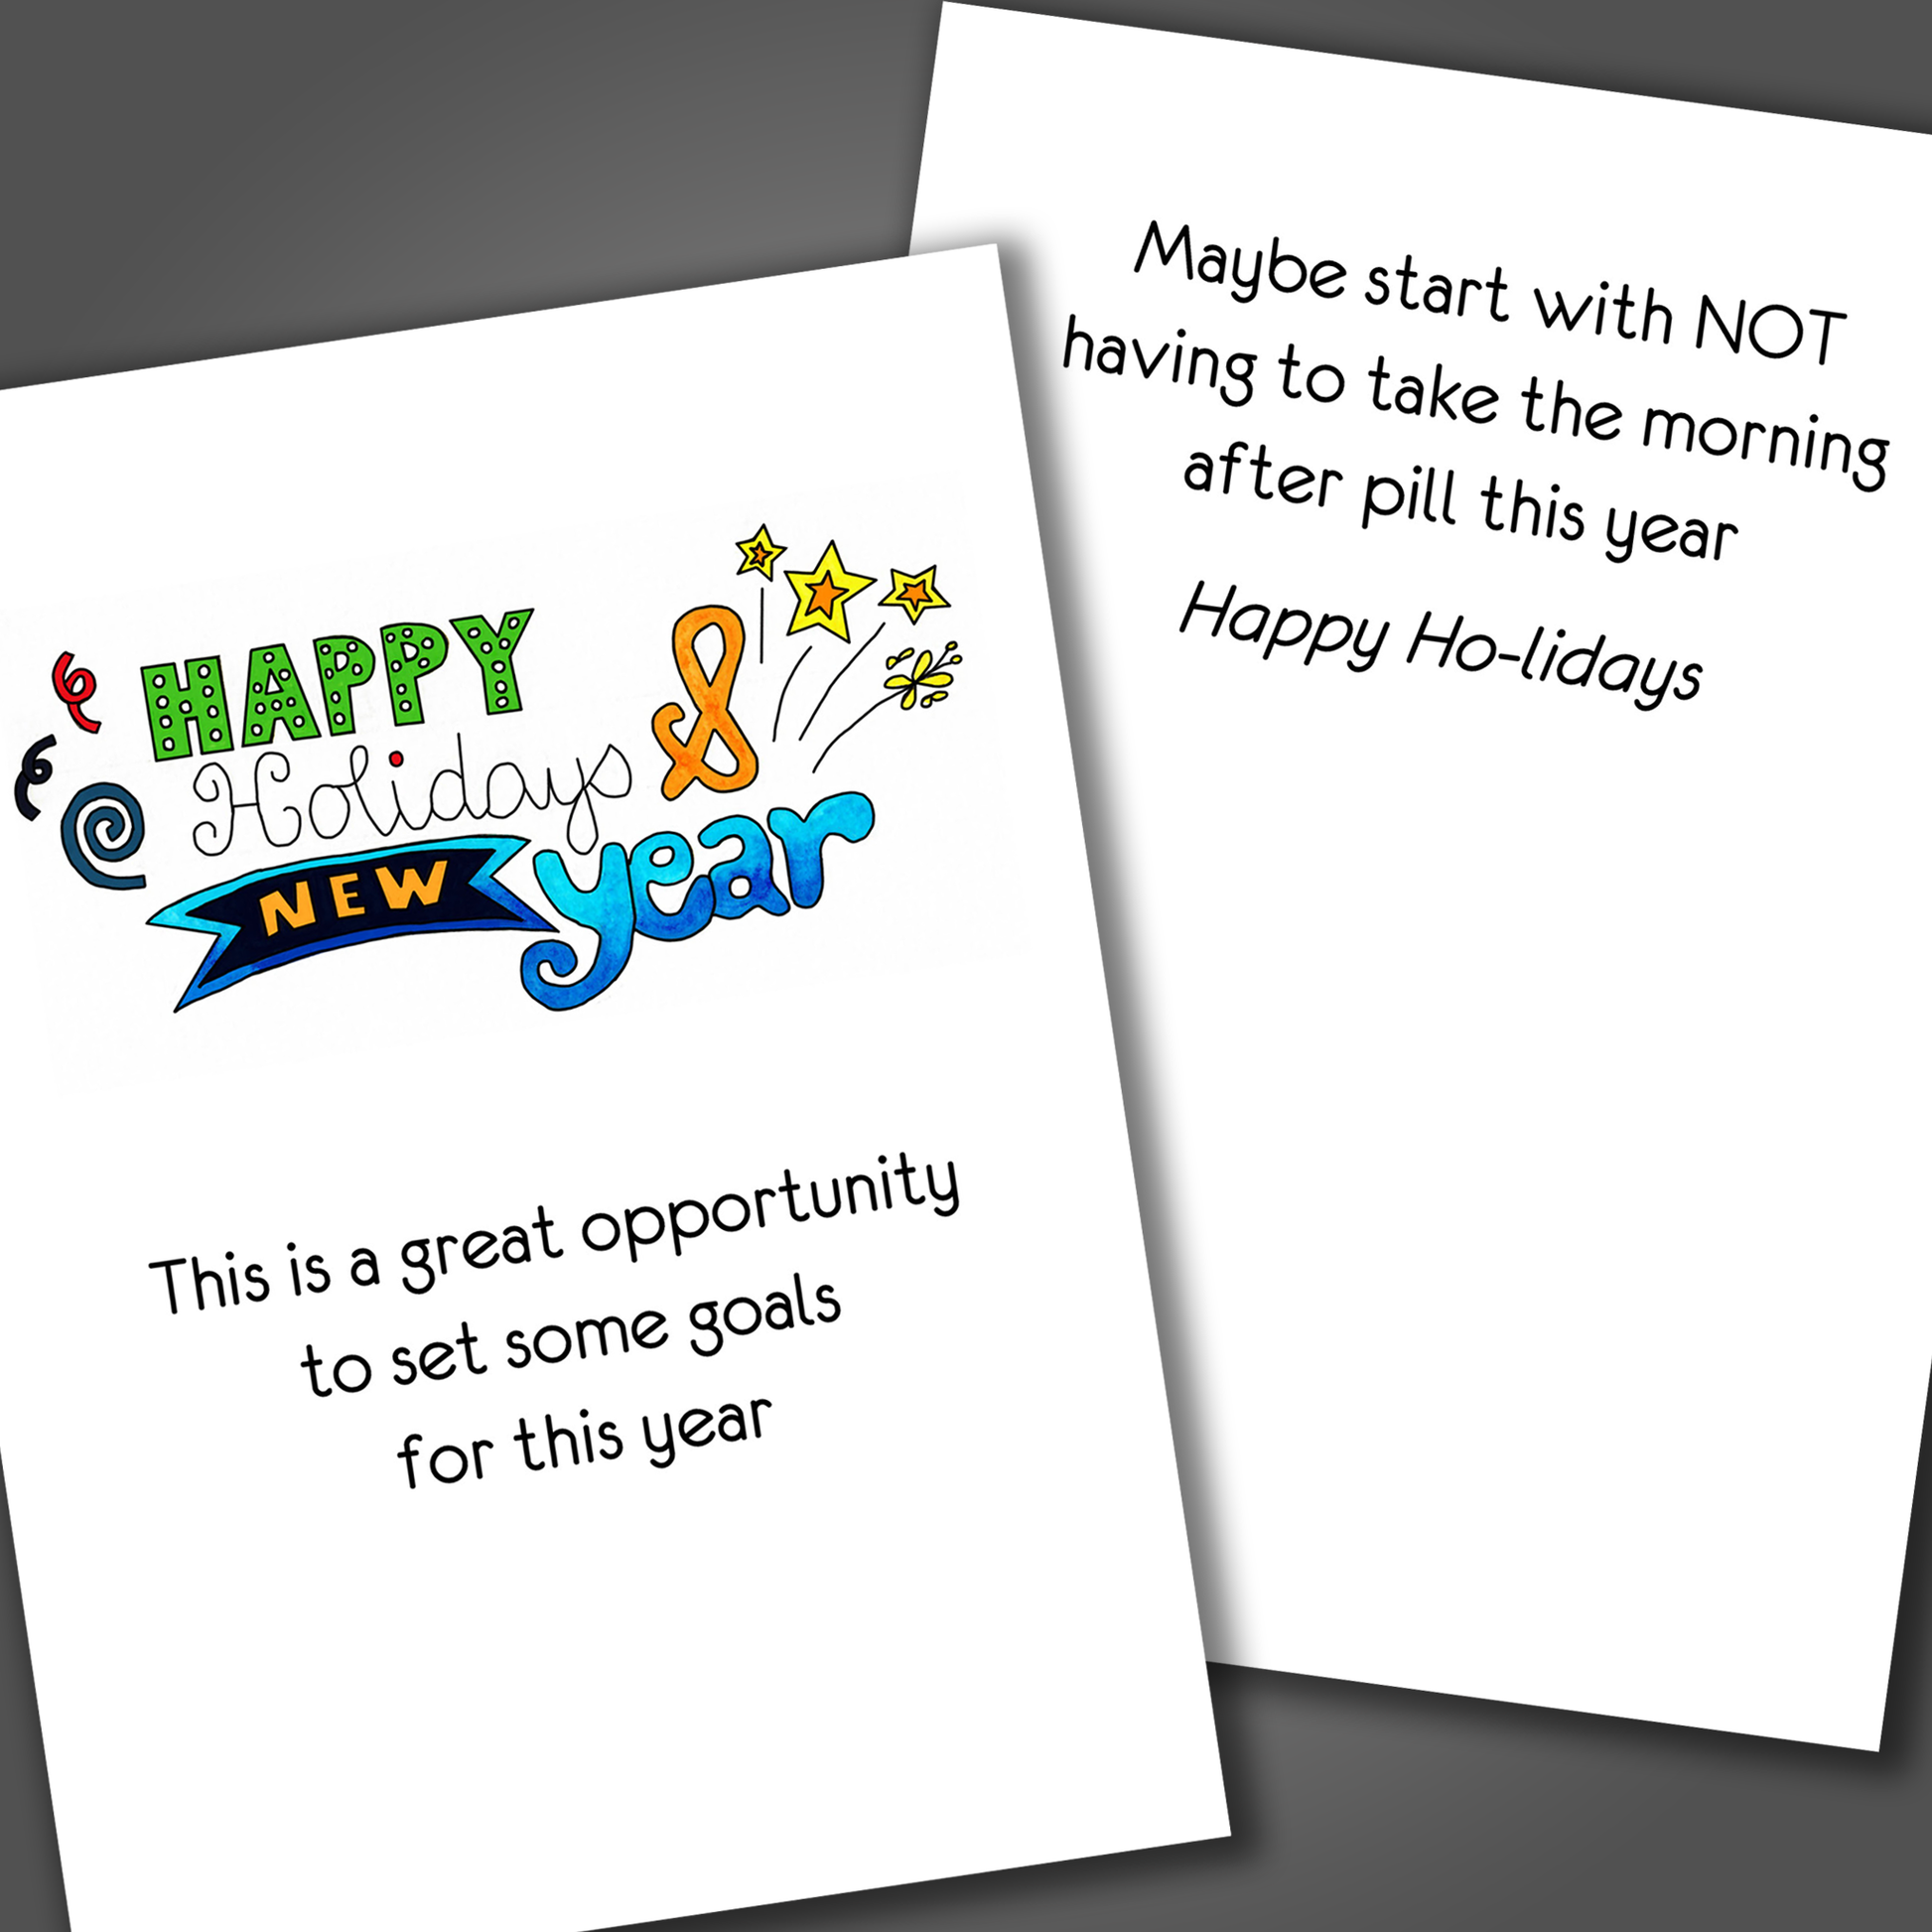 Funny happy holidays and happy new year card with both words drawn on the front of the card in blue and yellow. Inside the card is a funny joke for a woman that ends in happy ho-lidays.